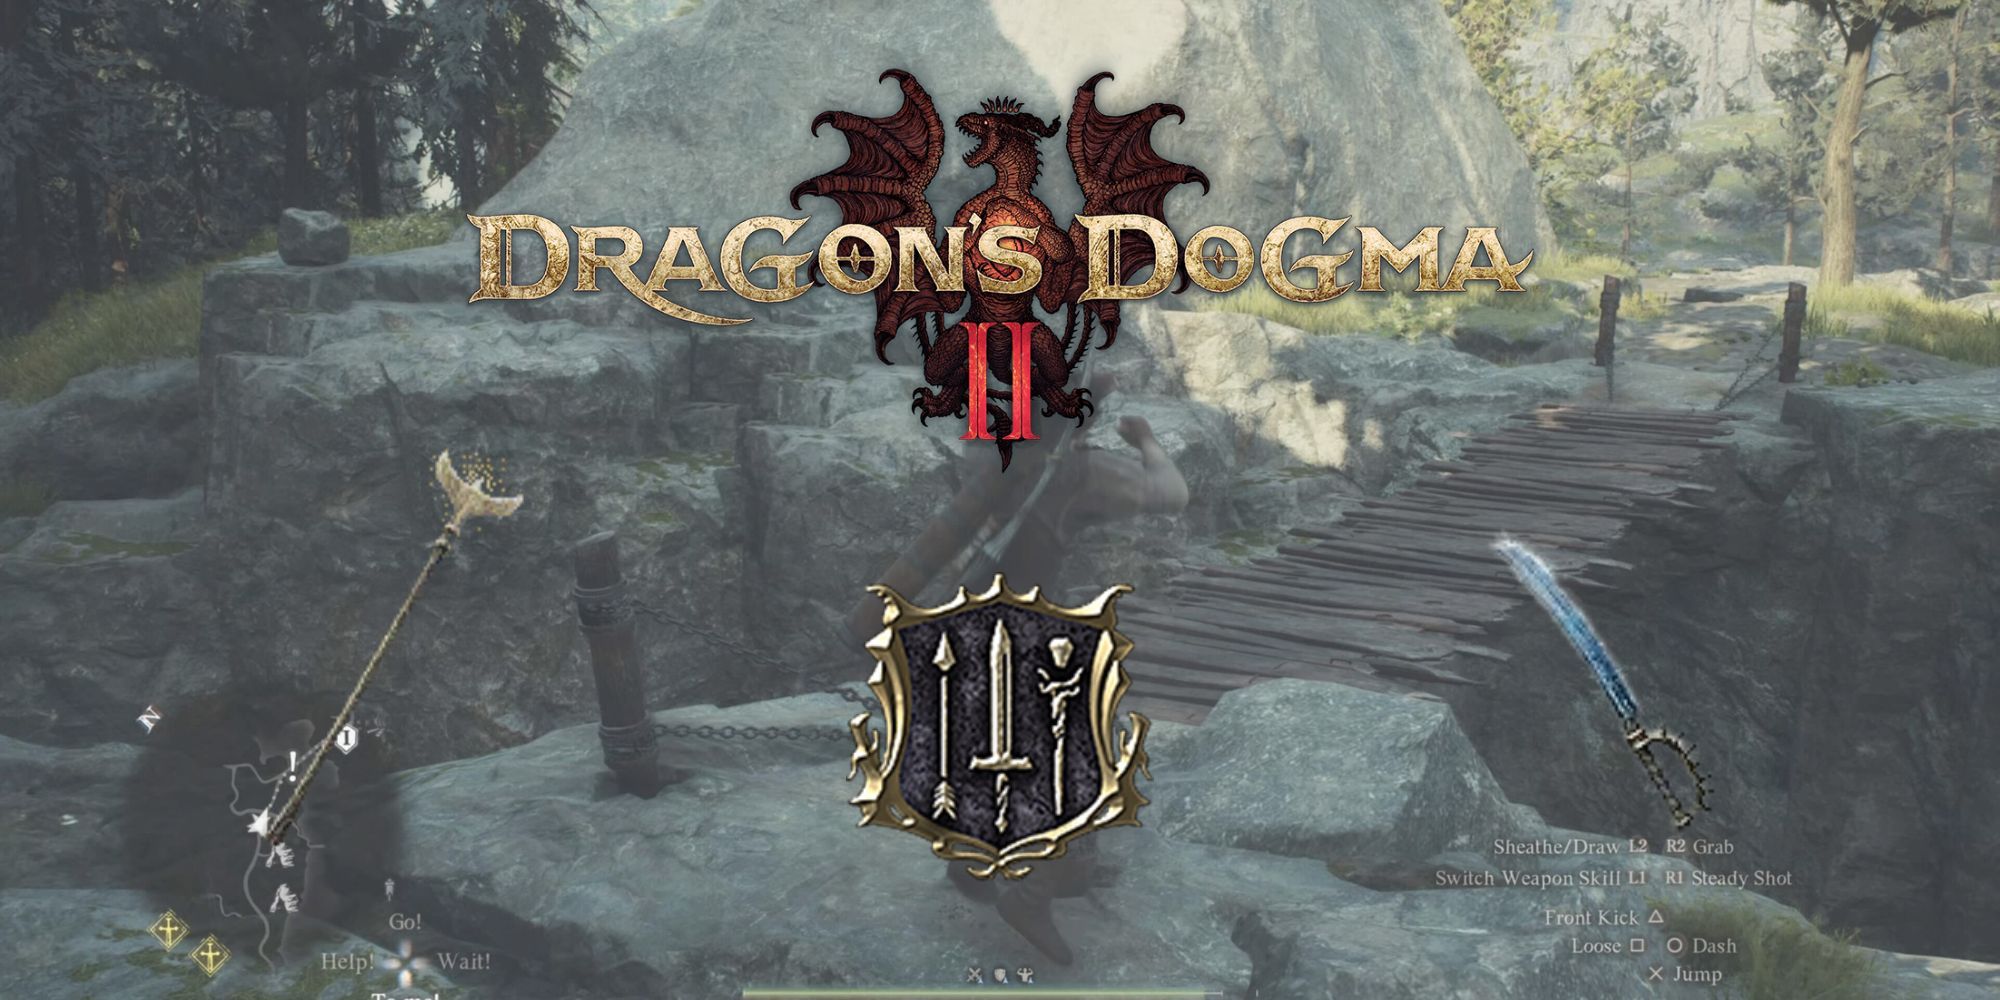 The Dragon's Dogma 2 logo with the Warfarer icon and two weapons from the game